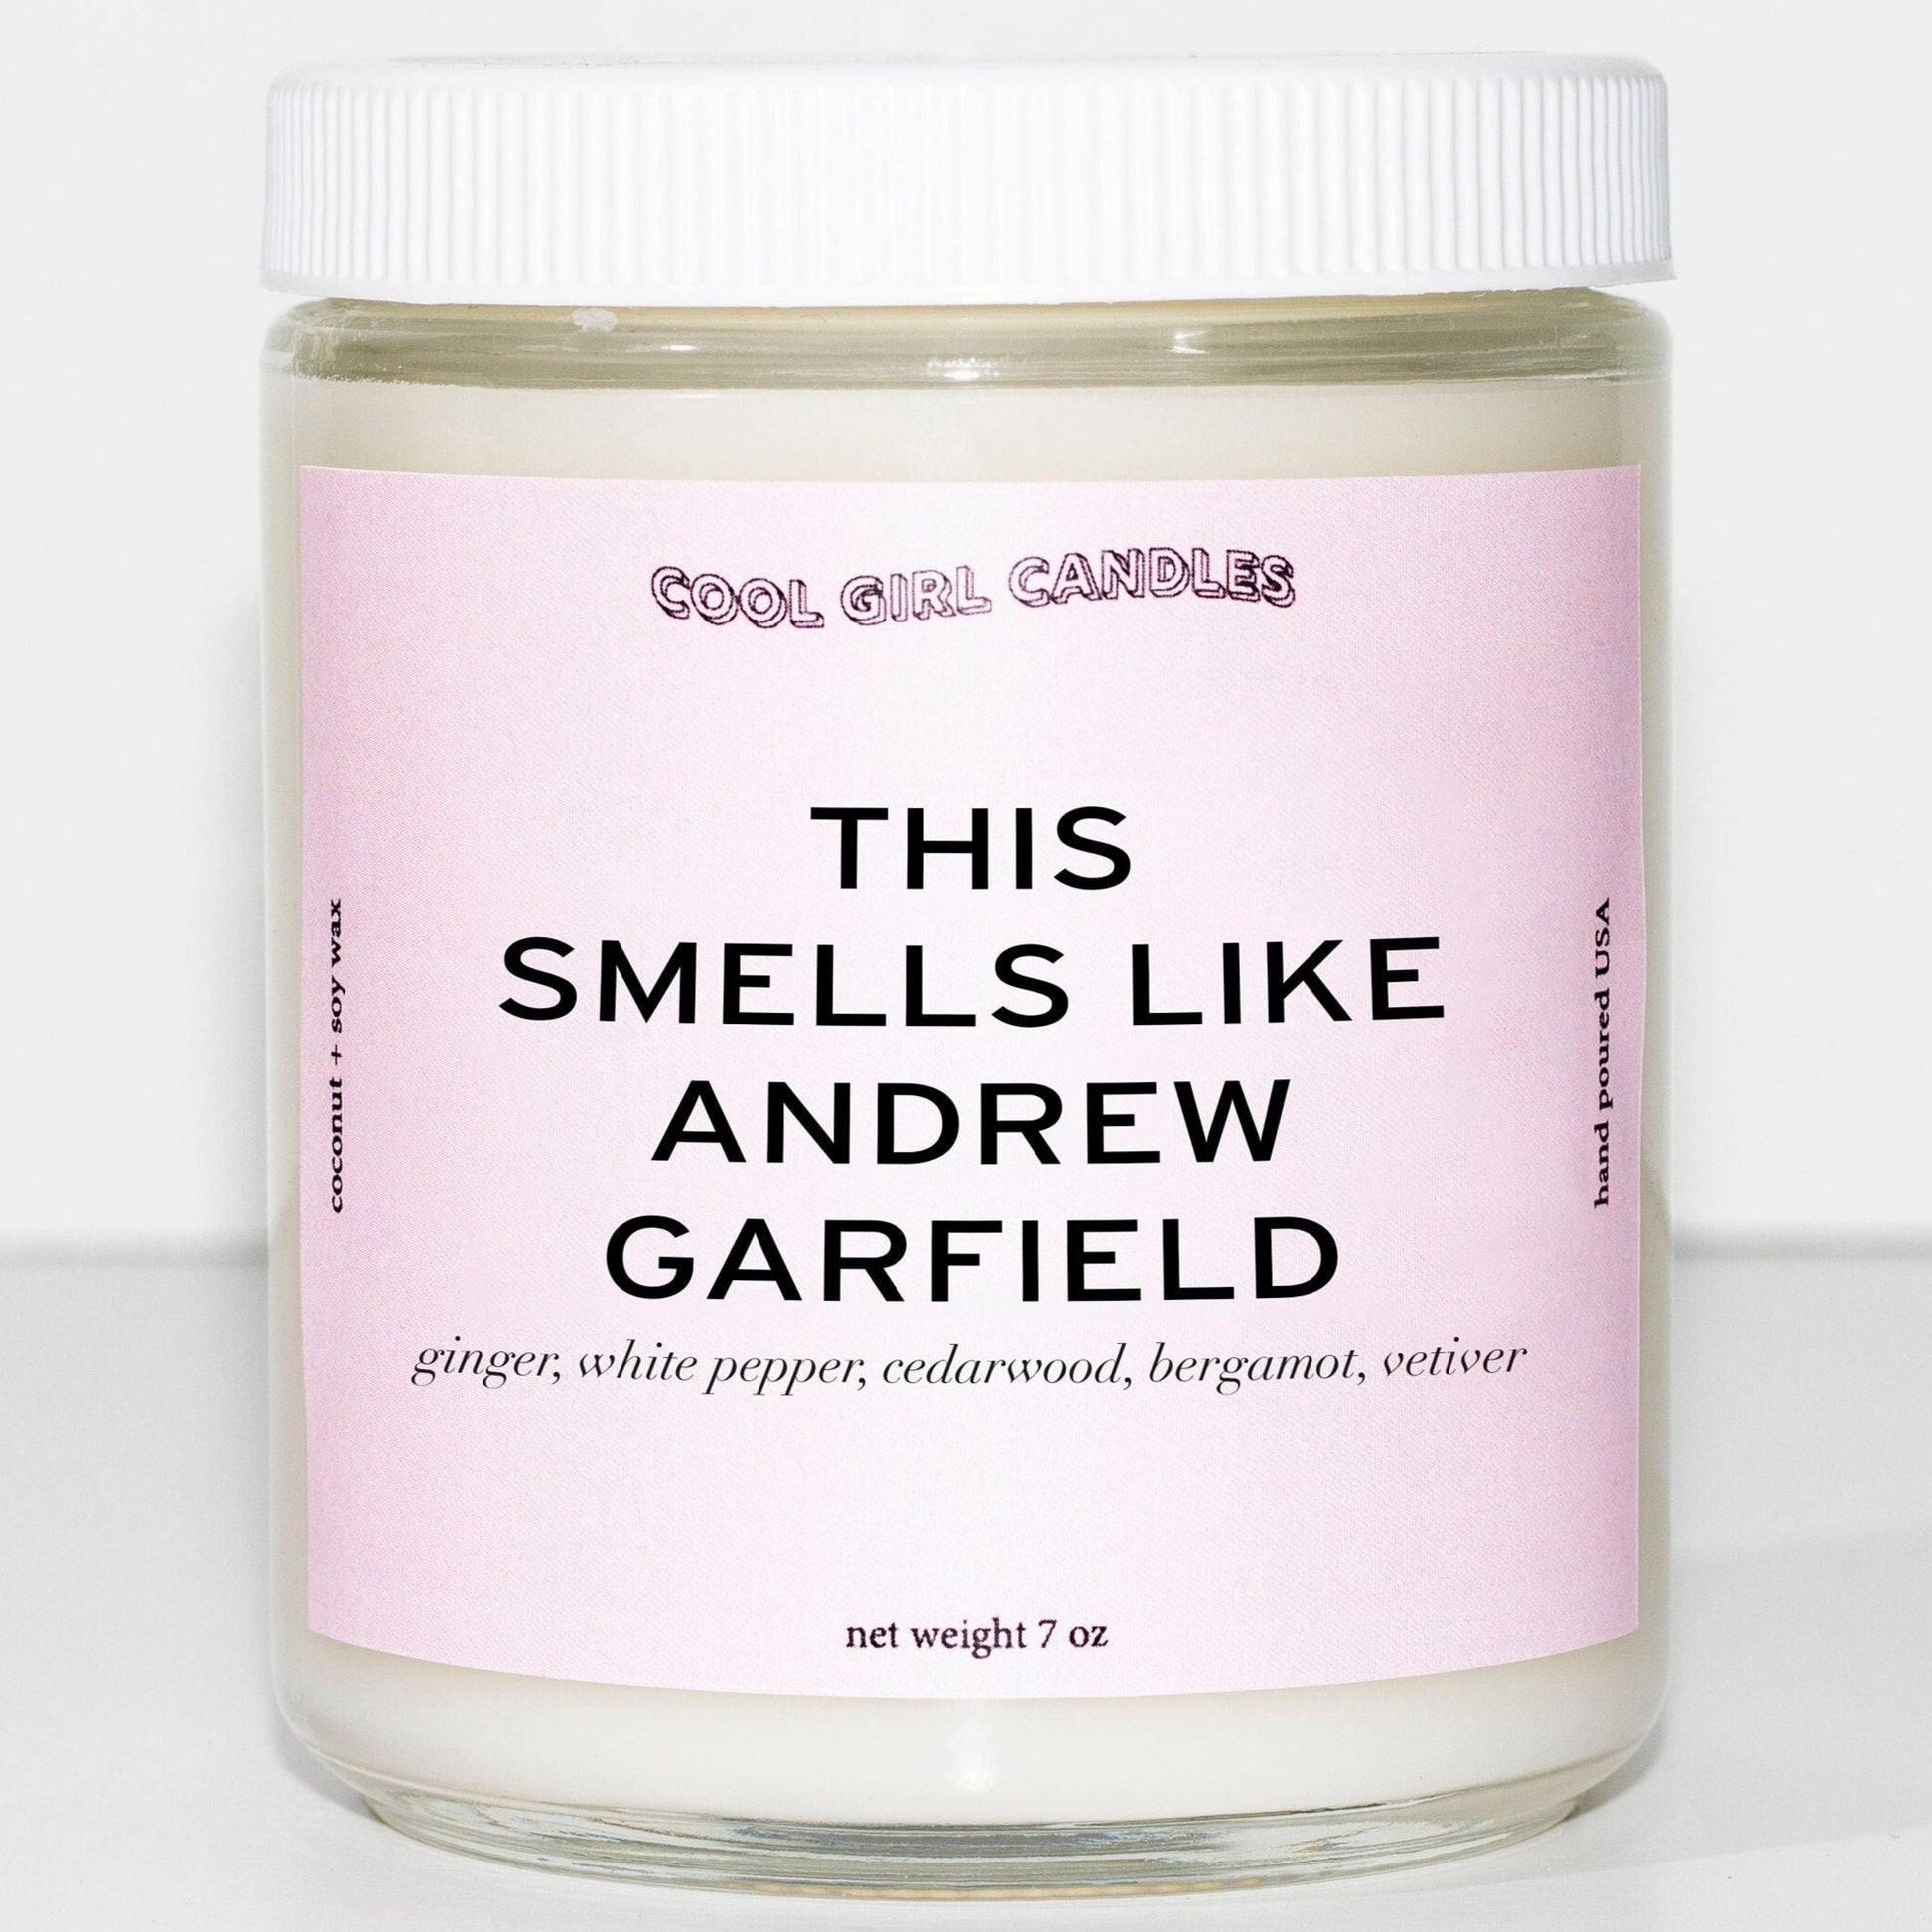 cool girl candles this smells like andrew garfield candle 